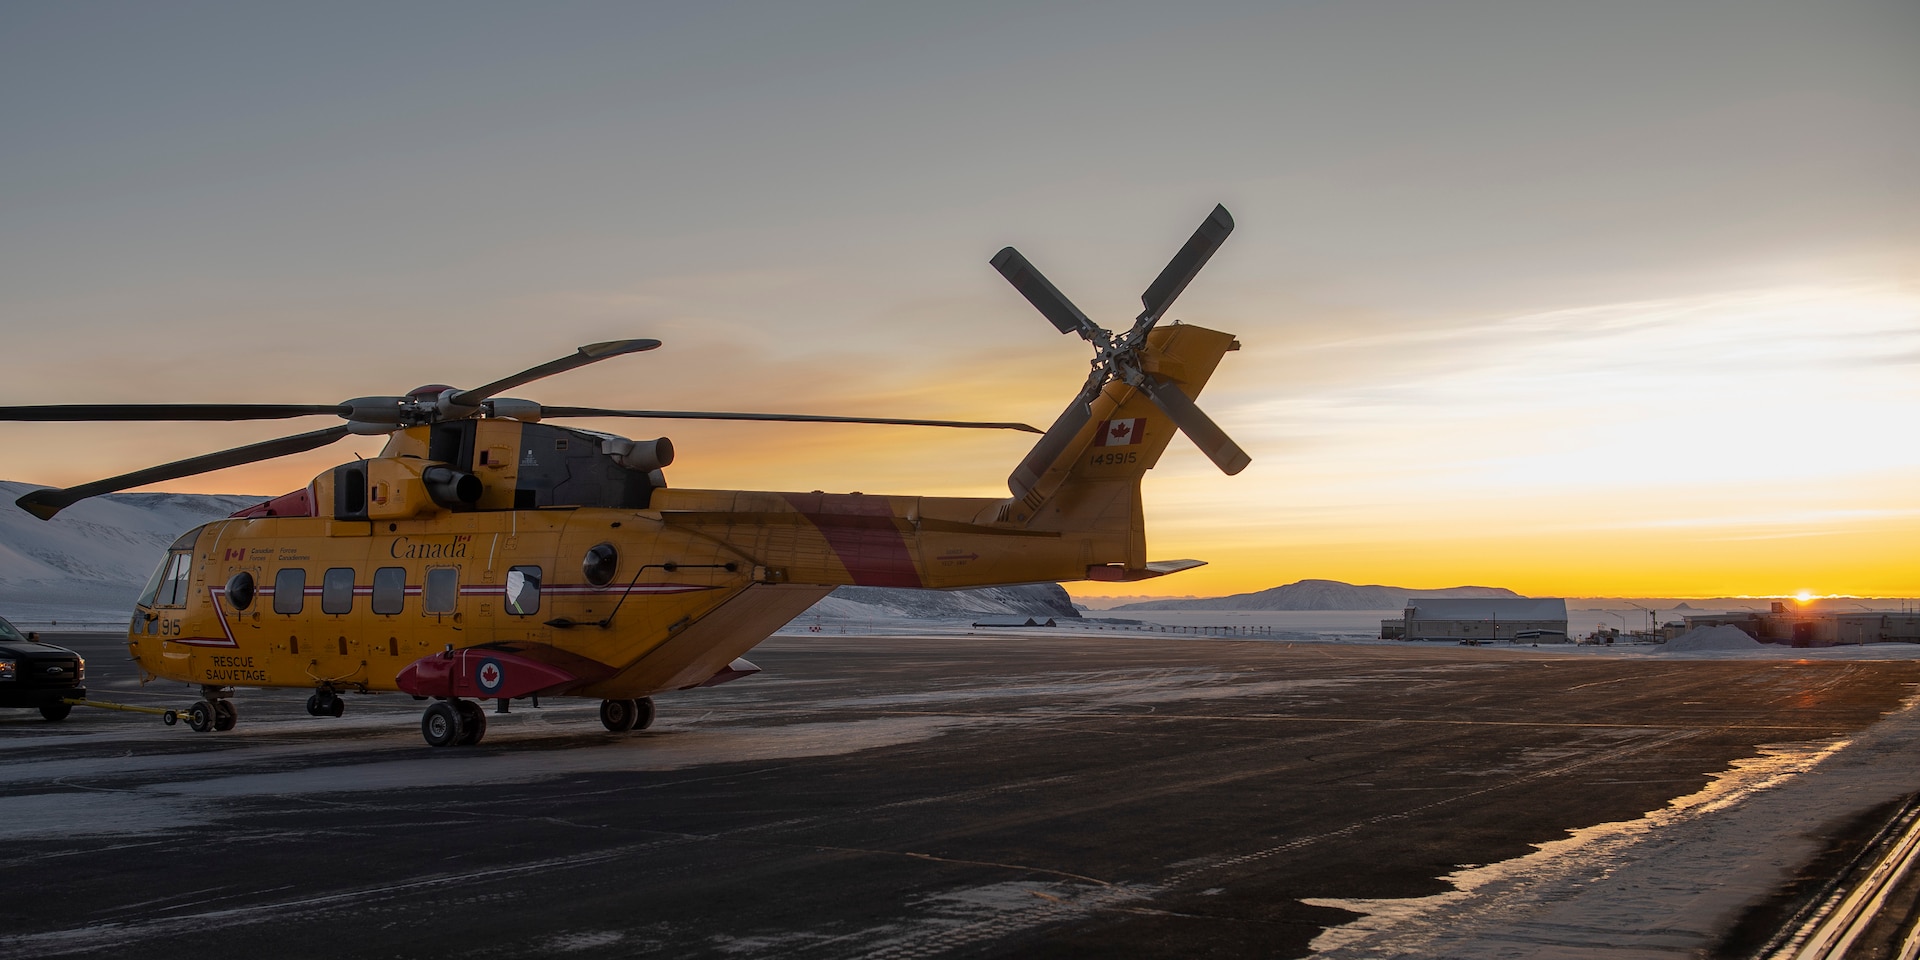 A Royal Canadian Air Force CH-149 Cormorant Search and Rescue helicopters positions itself on the airfield in preparation for Operation NOBLE DEFENDER at Thule Air Base, Greenland, March 14, 2022.